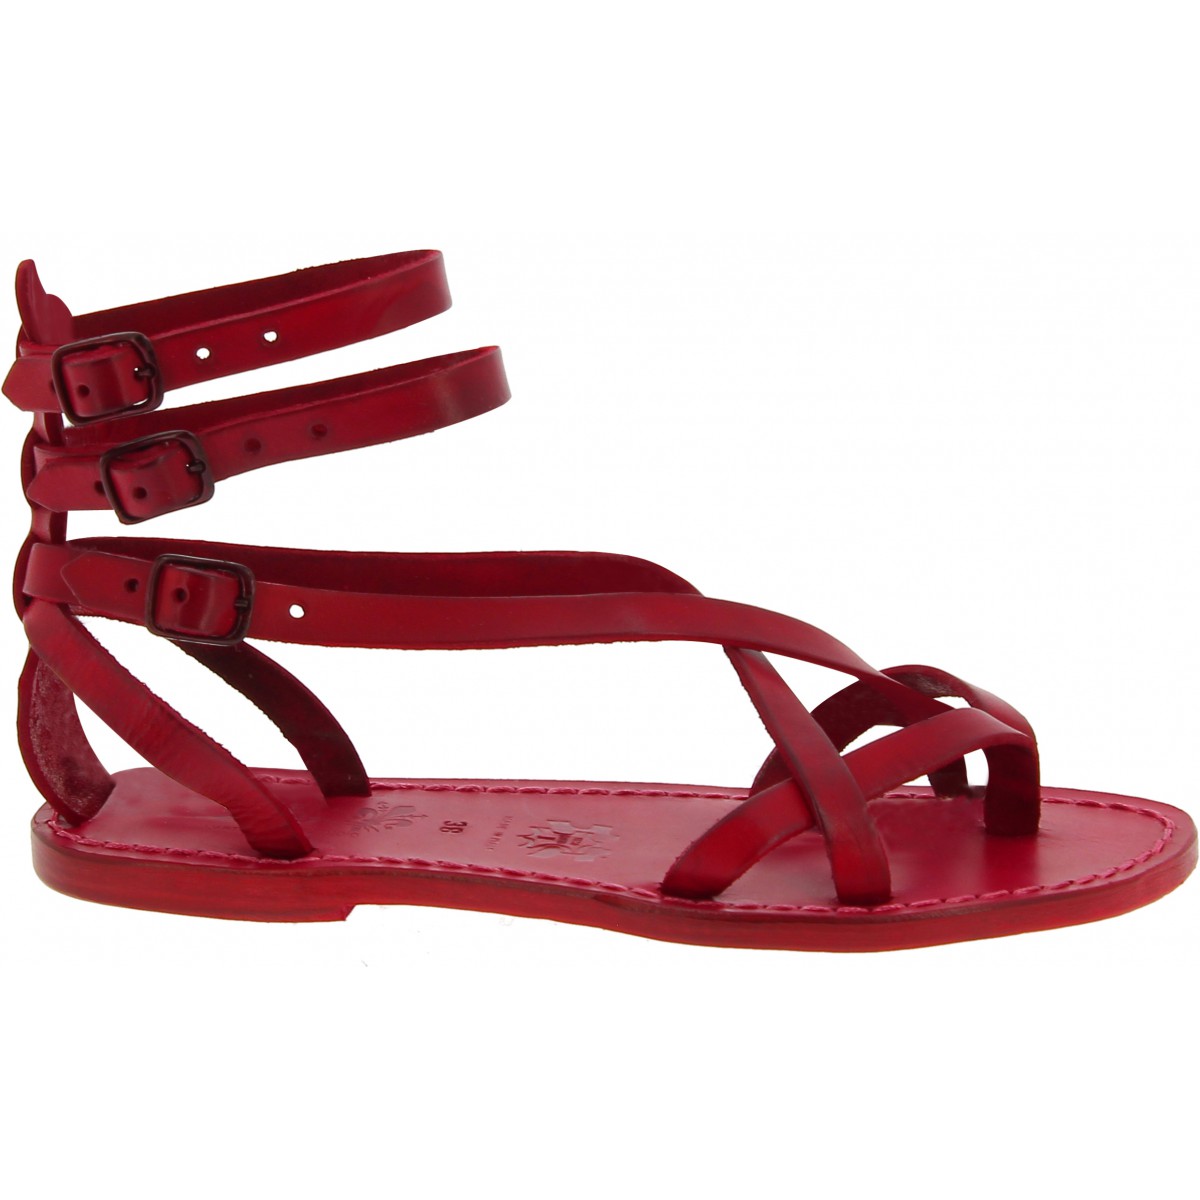 Red Leather Sandals Flat | lupon.gov.ph